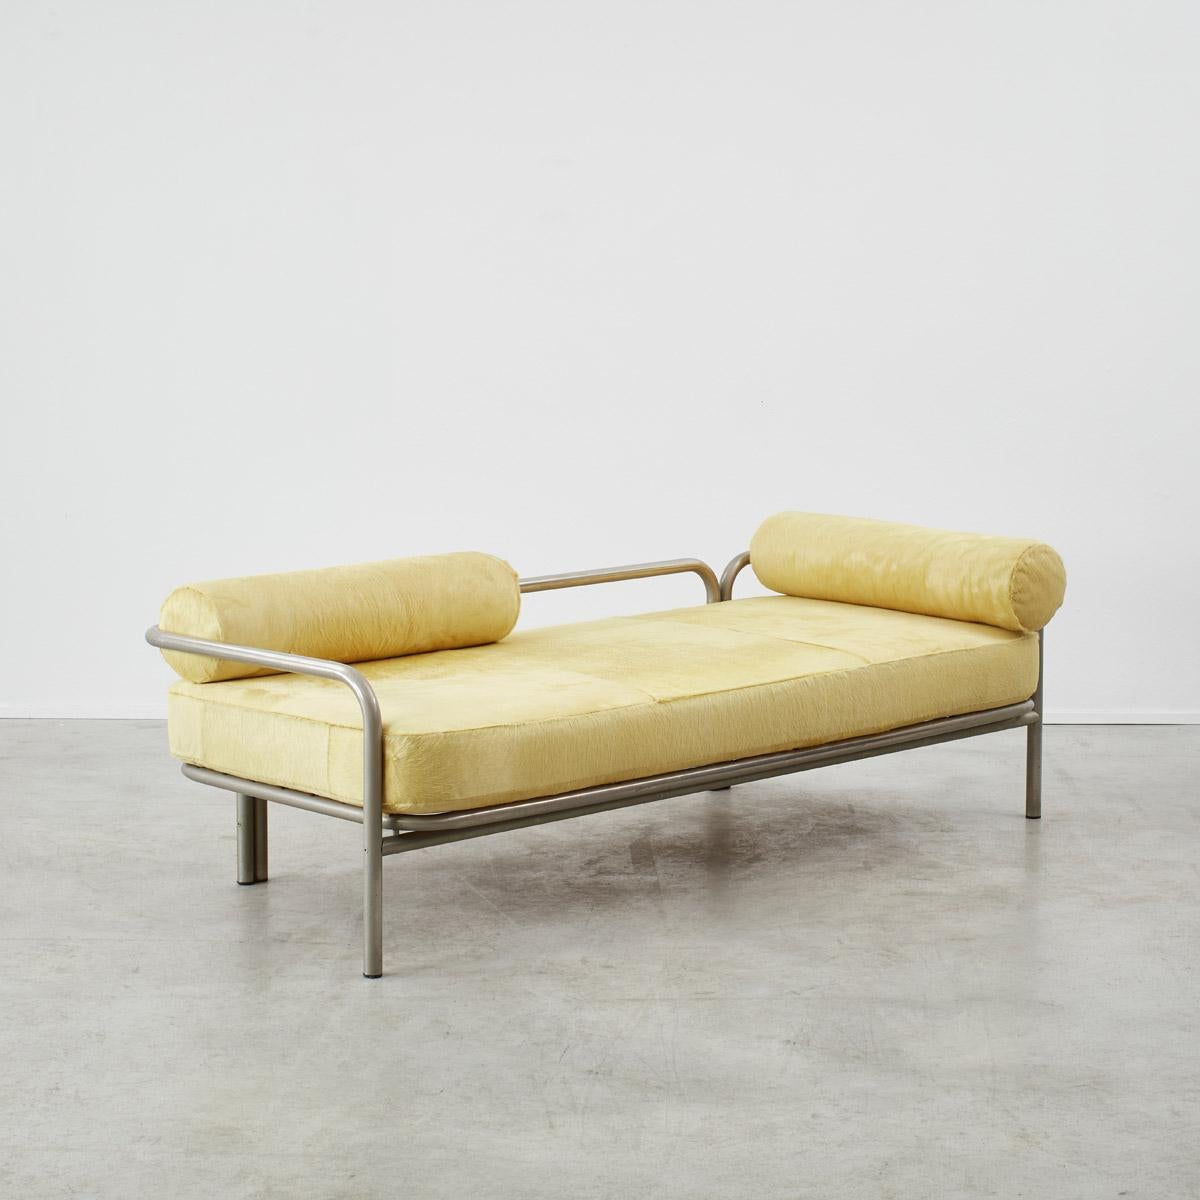 Gae Aulenti Locus Solus daybed for Poltronova, Italy 1964 In Good Condition For Sale In London, GB